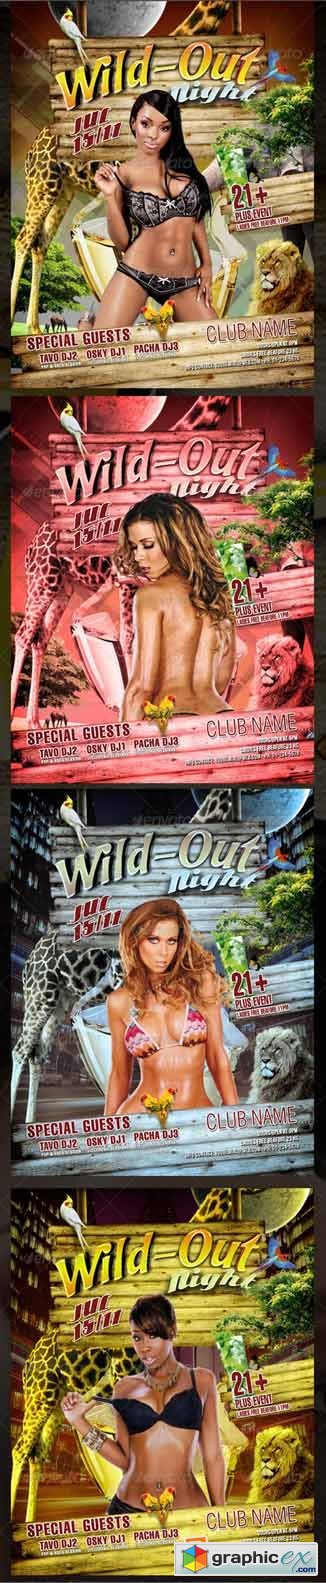 Wild Out Nights 460155